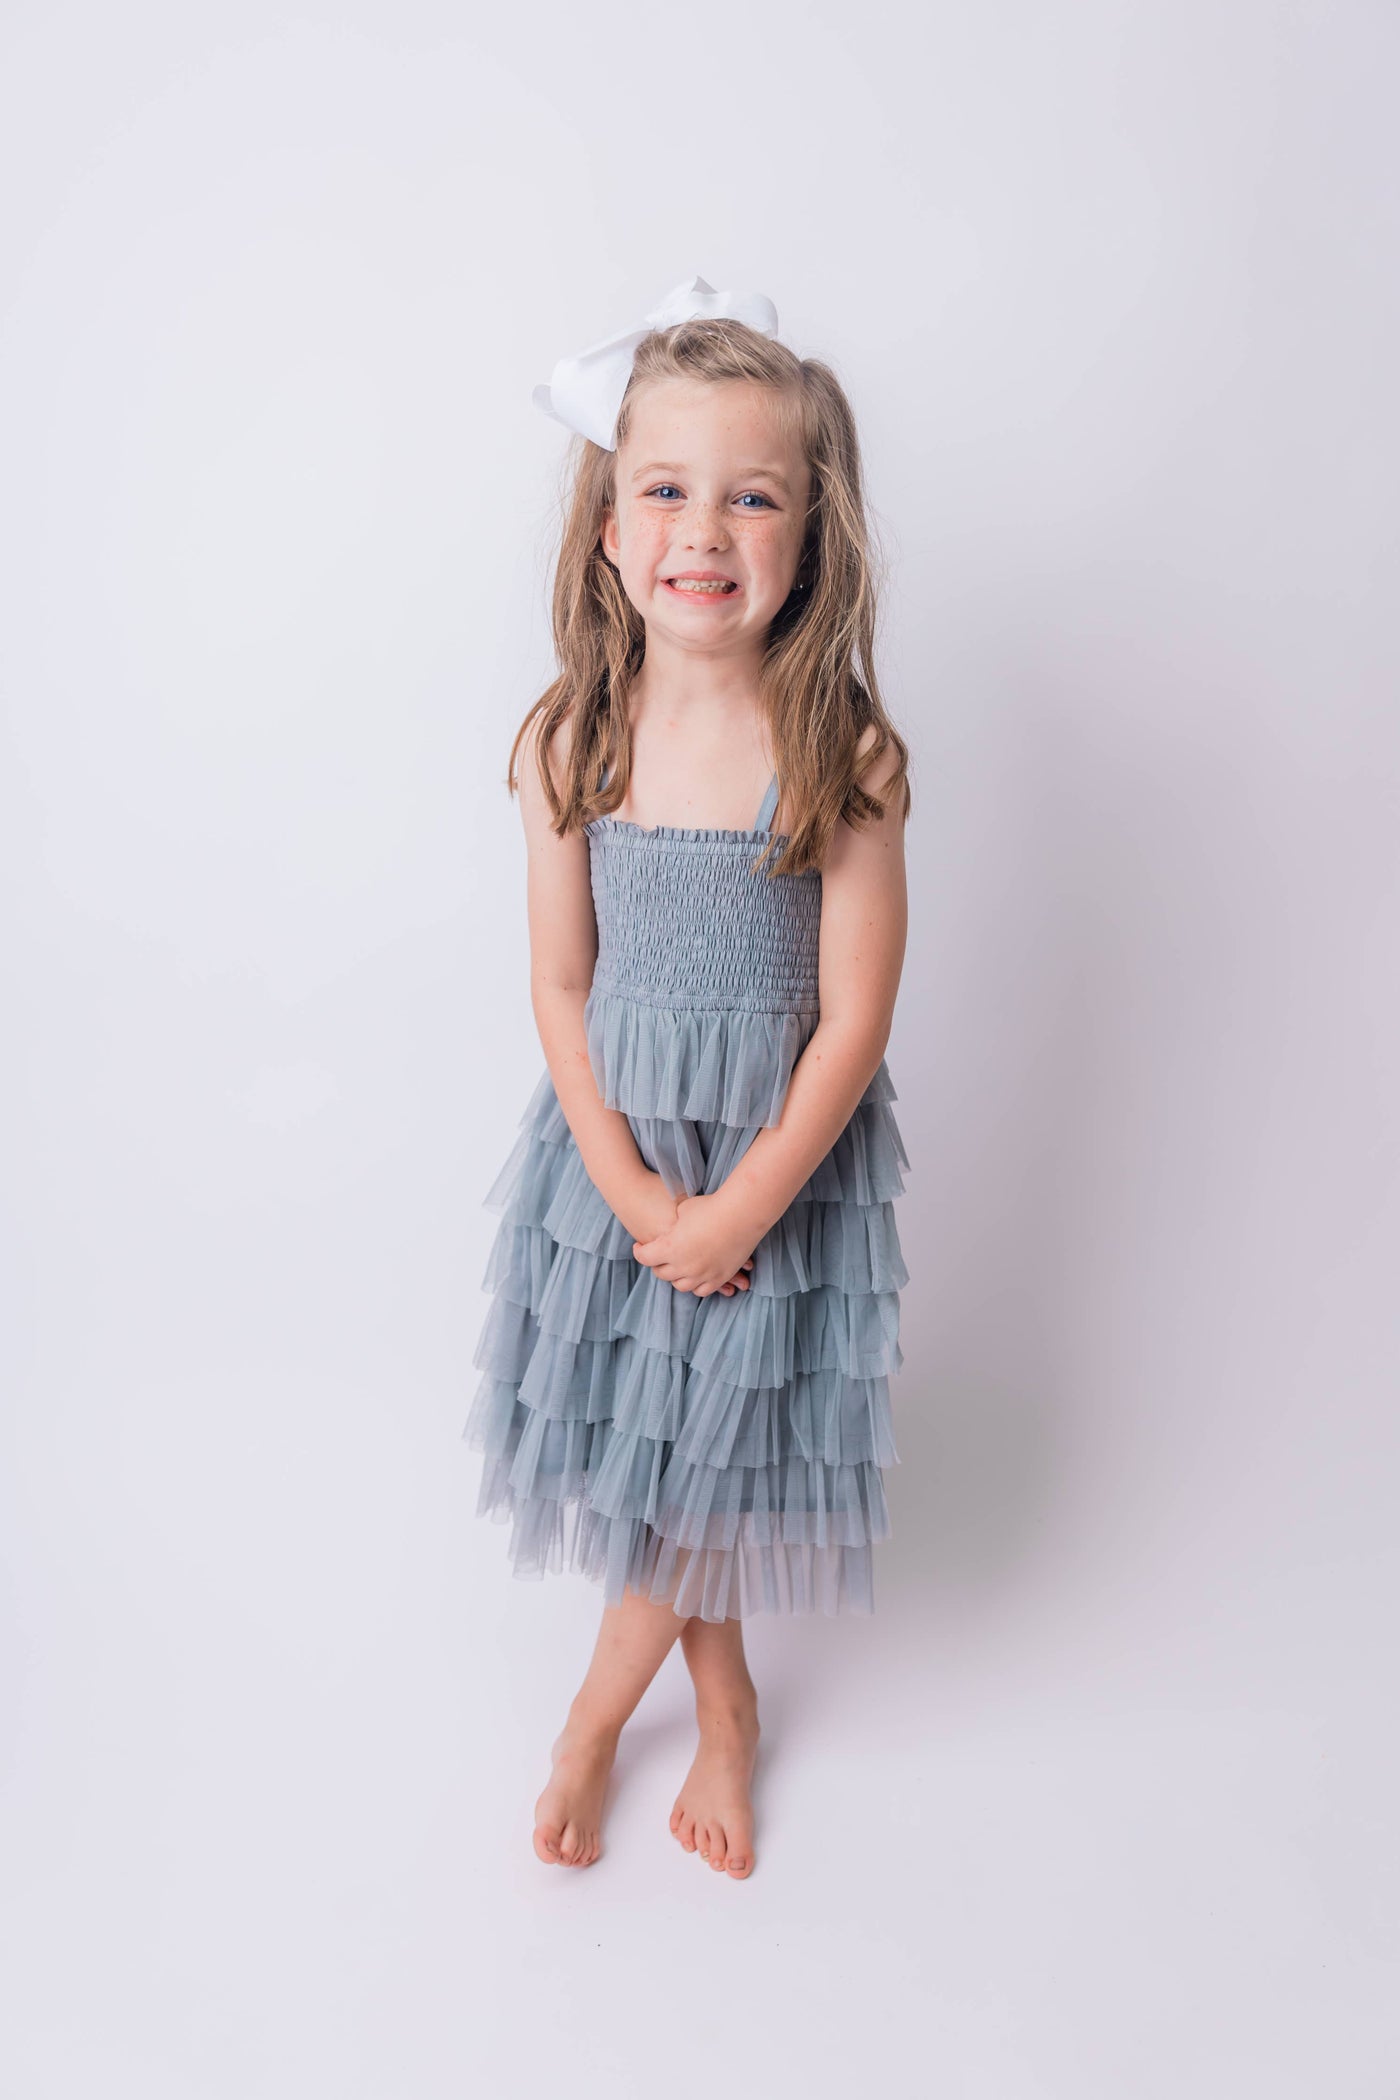 Grey Tulle Solid Color Tiered Ruffle Dress